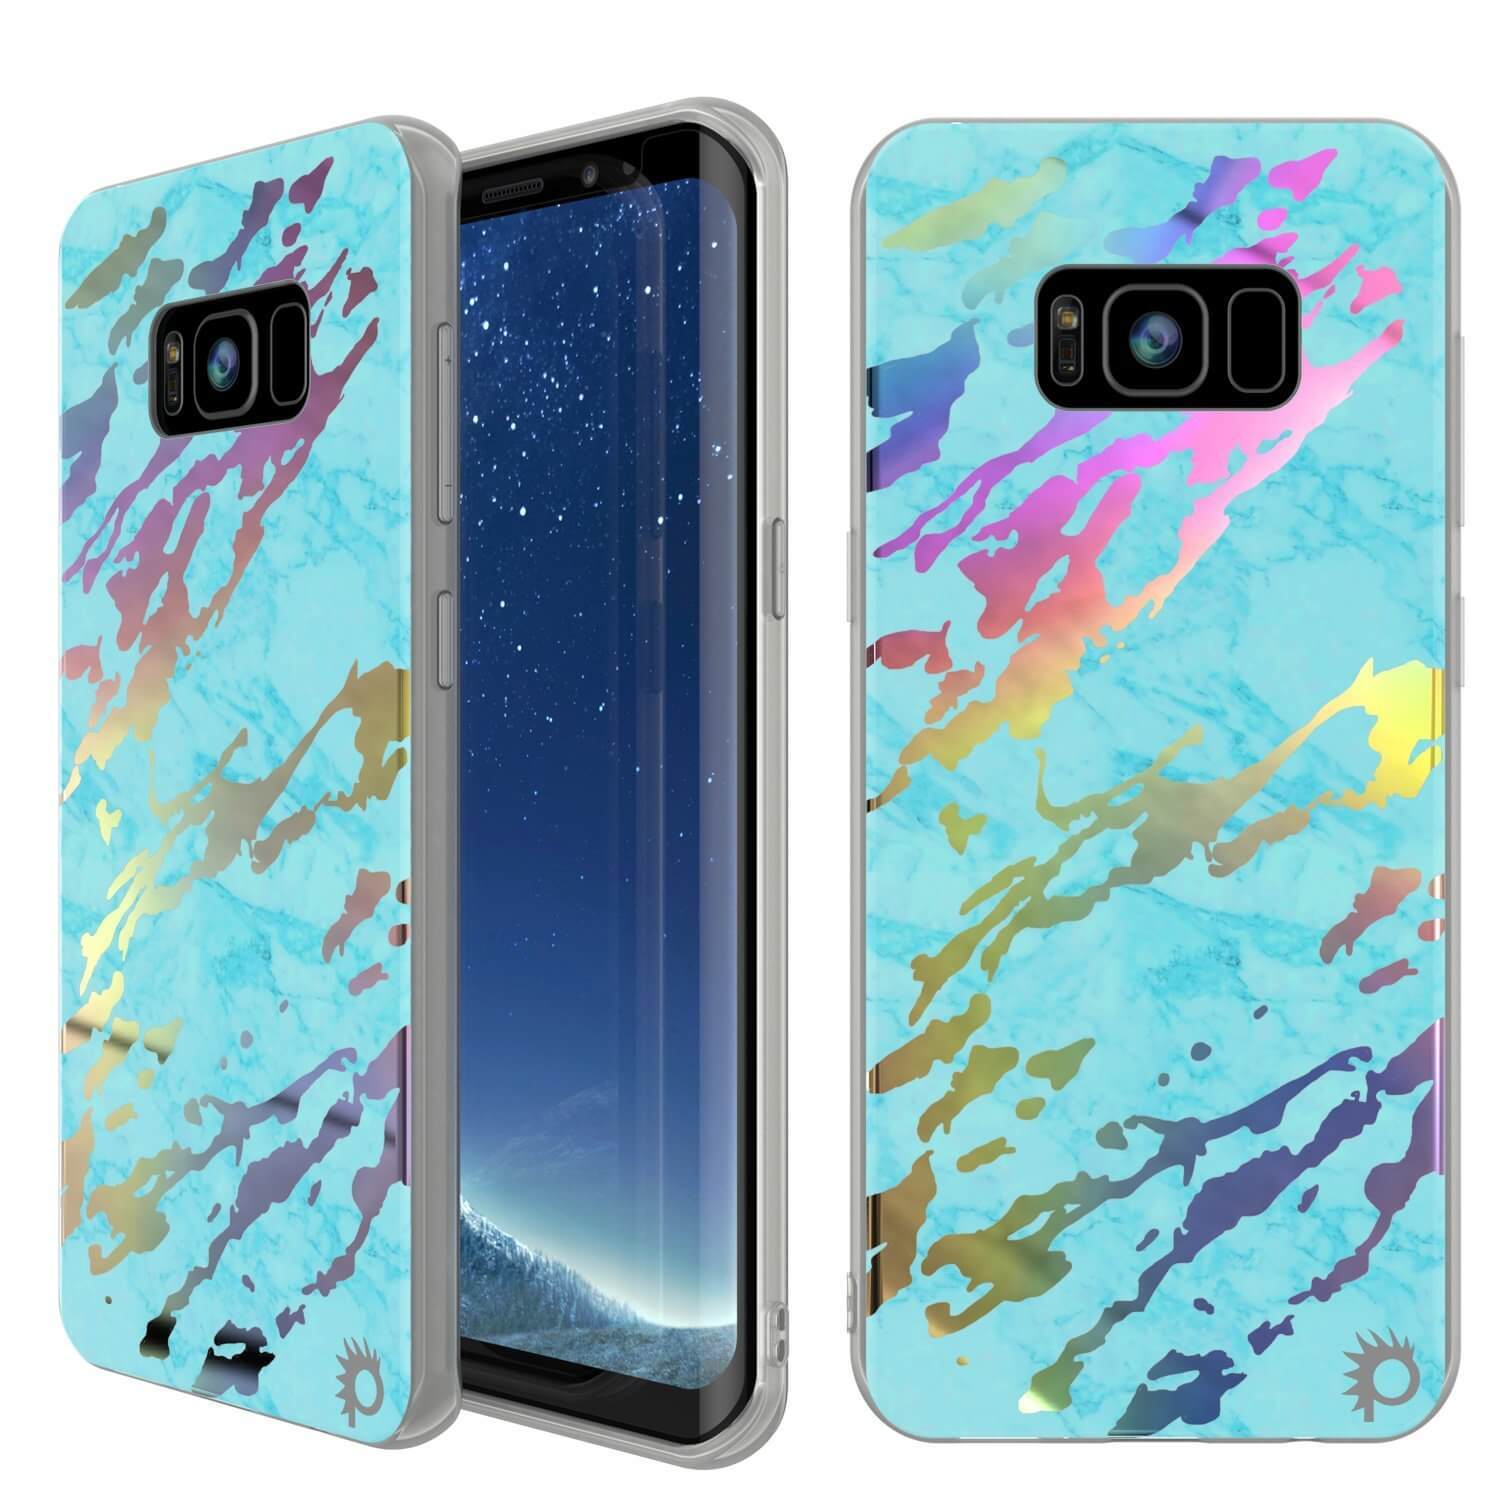 Punkcase Galaxy S8+ PLUS Marble Case, Protective Full Body Cover W/PunkShield Screen Protector (Teal Onyx)